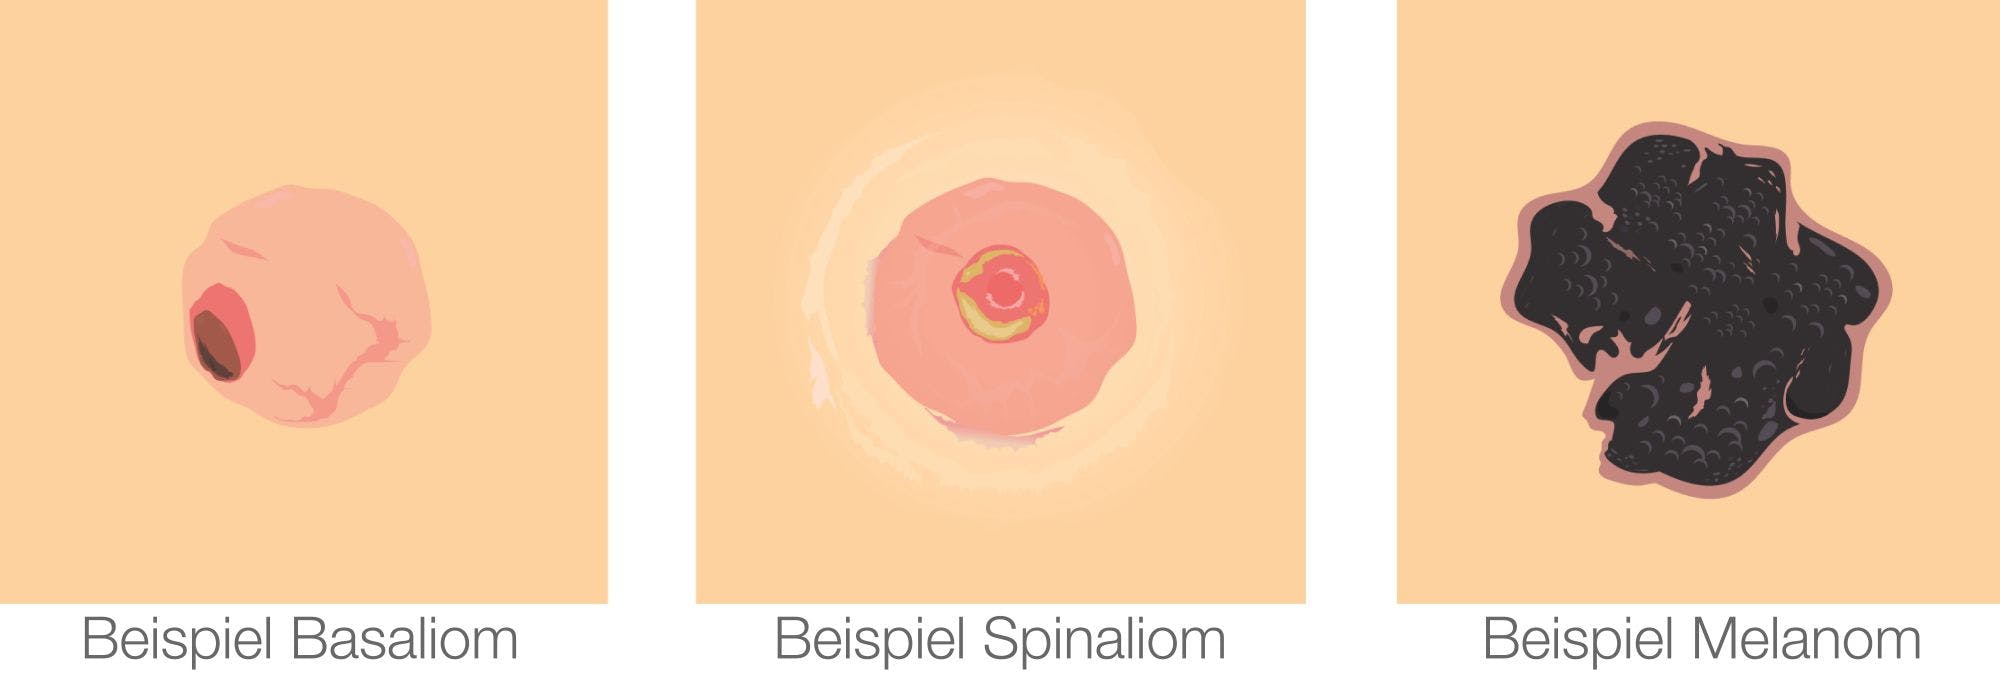 Illustration of a skin tumour, called spinalioma, for medical education.